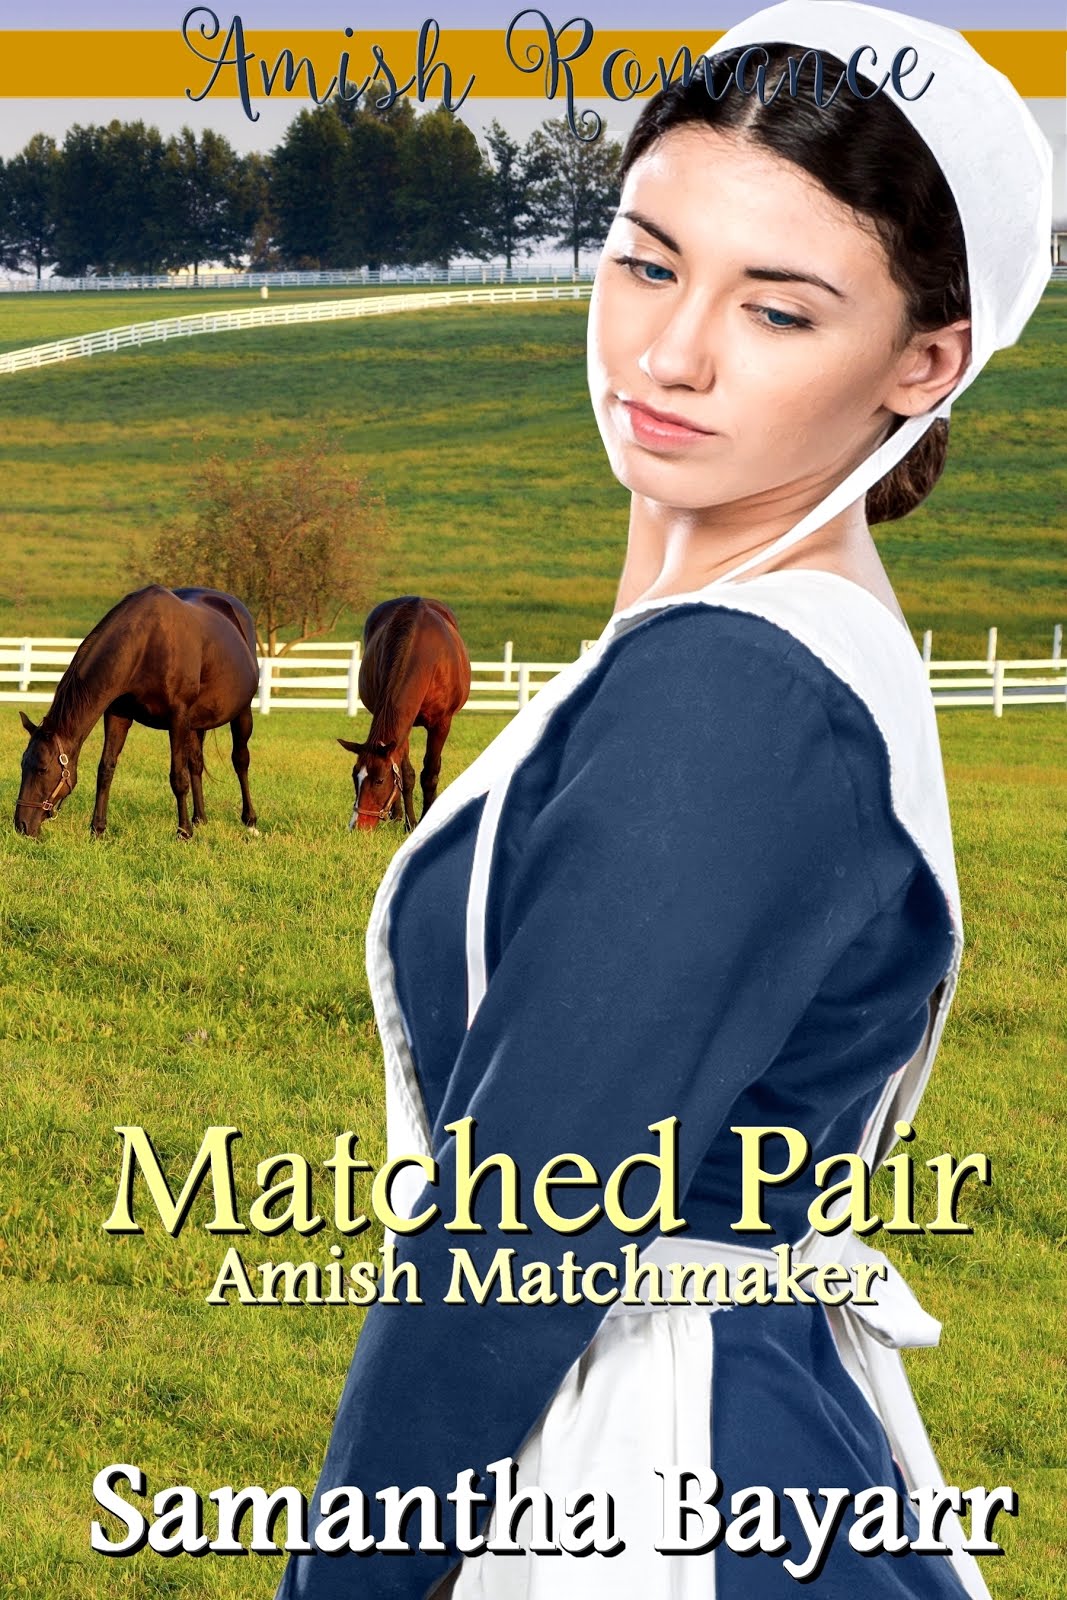 A Matched Pair: The Amish Matchmaker